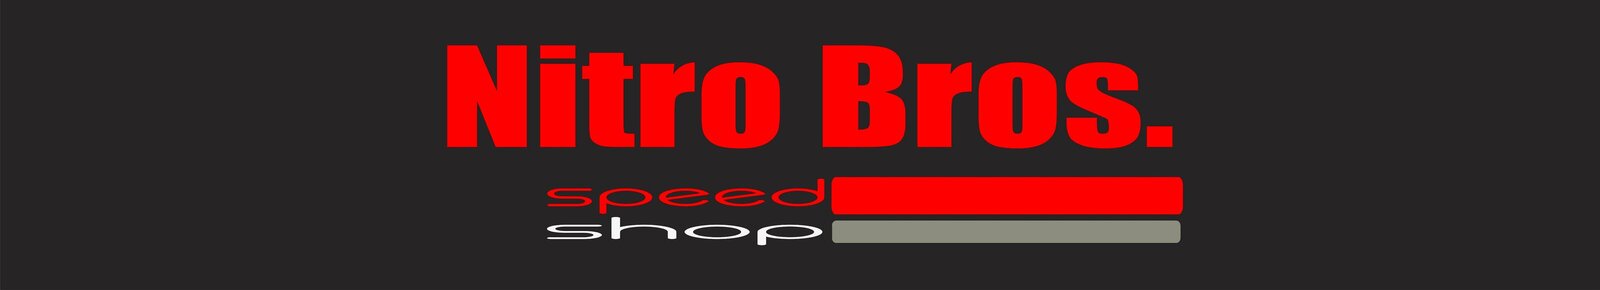 Red Nitro Bros.cdr Marion Ownens backgroundddd